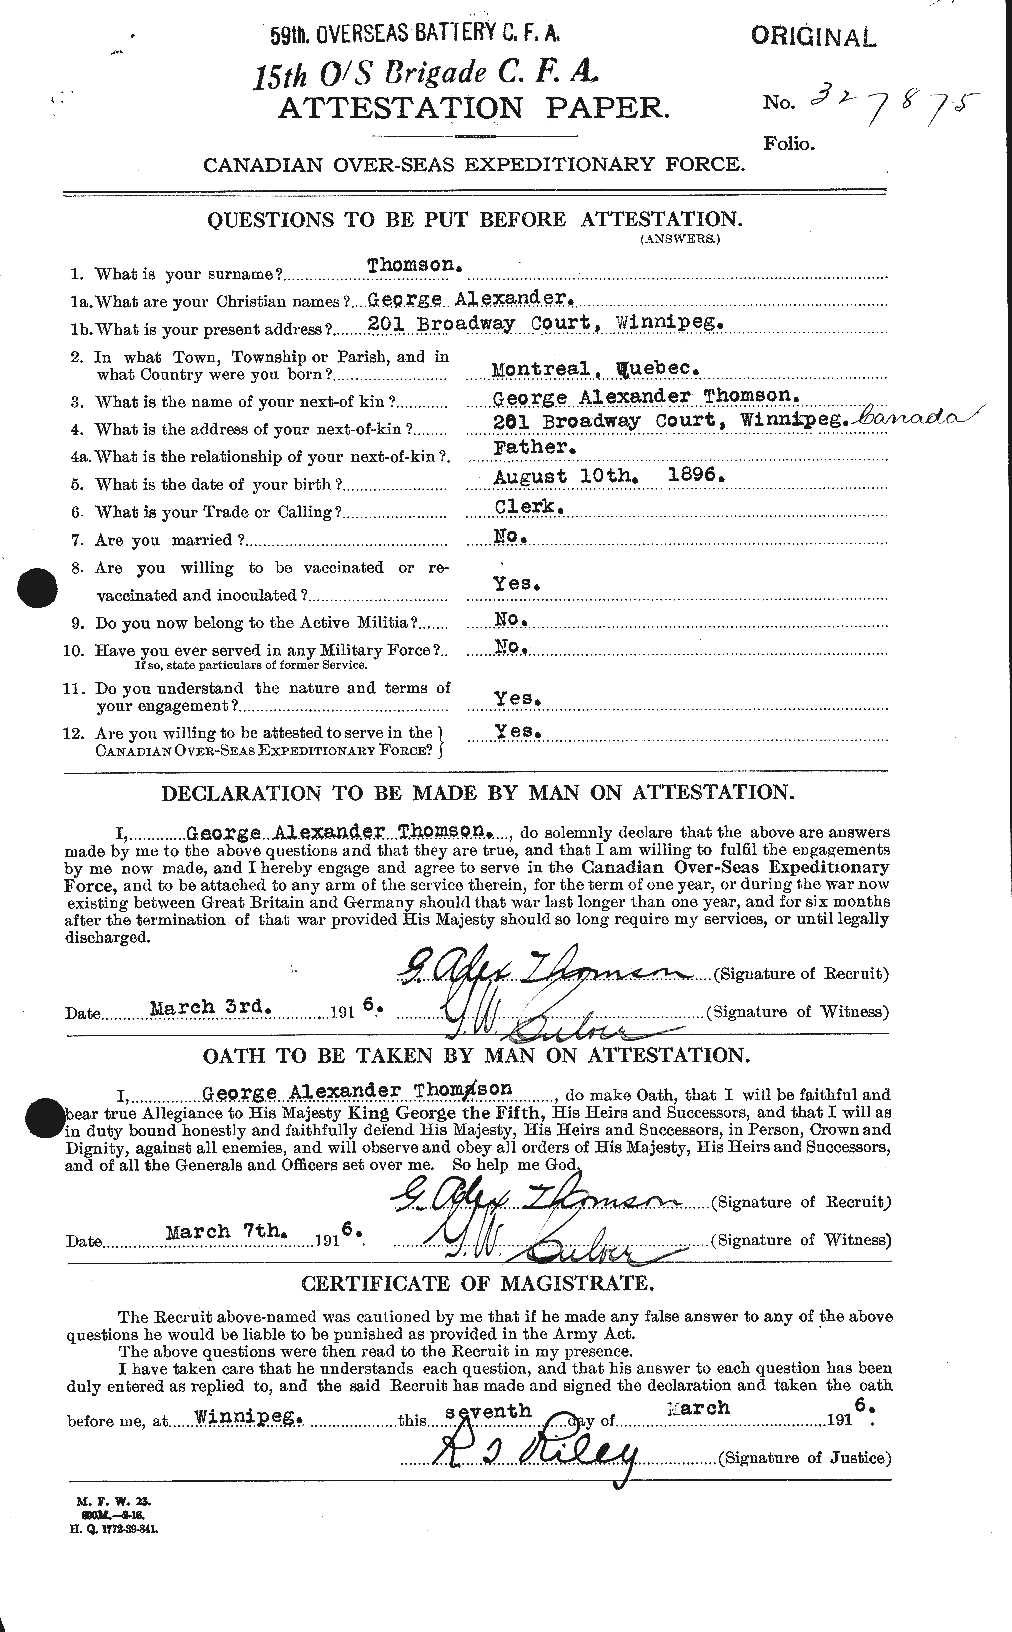 Personnel Records of the First World War - CEF 633704a